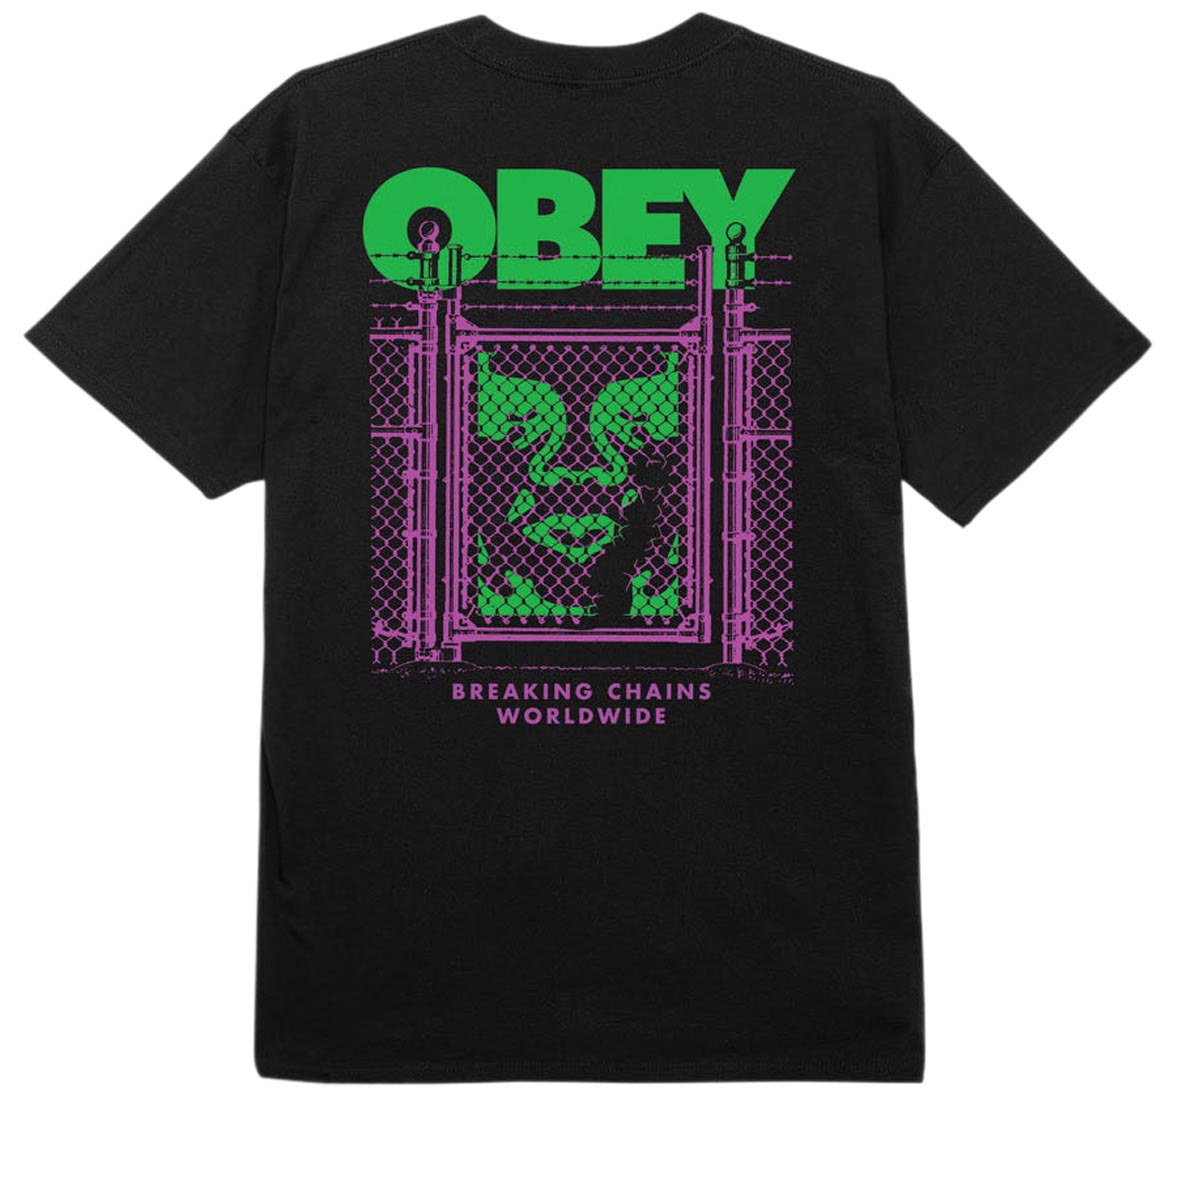 Obey Chain Link Fence Icon T-Shirt - Black image 1